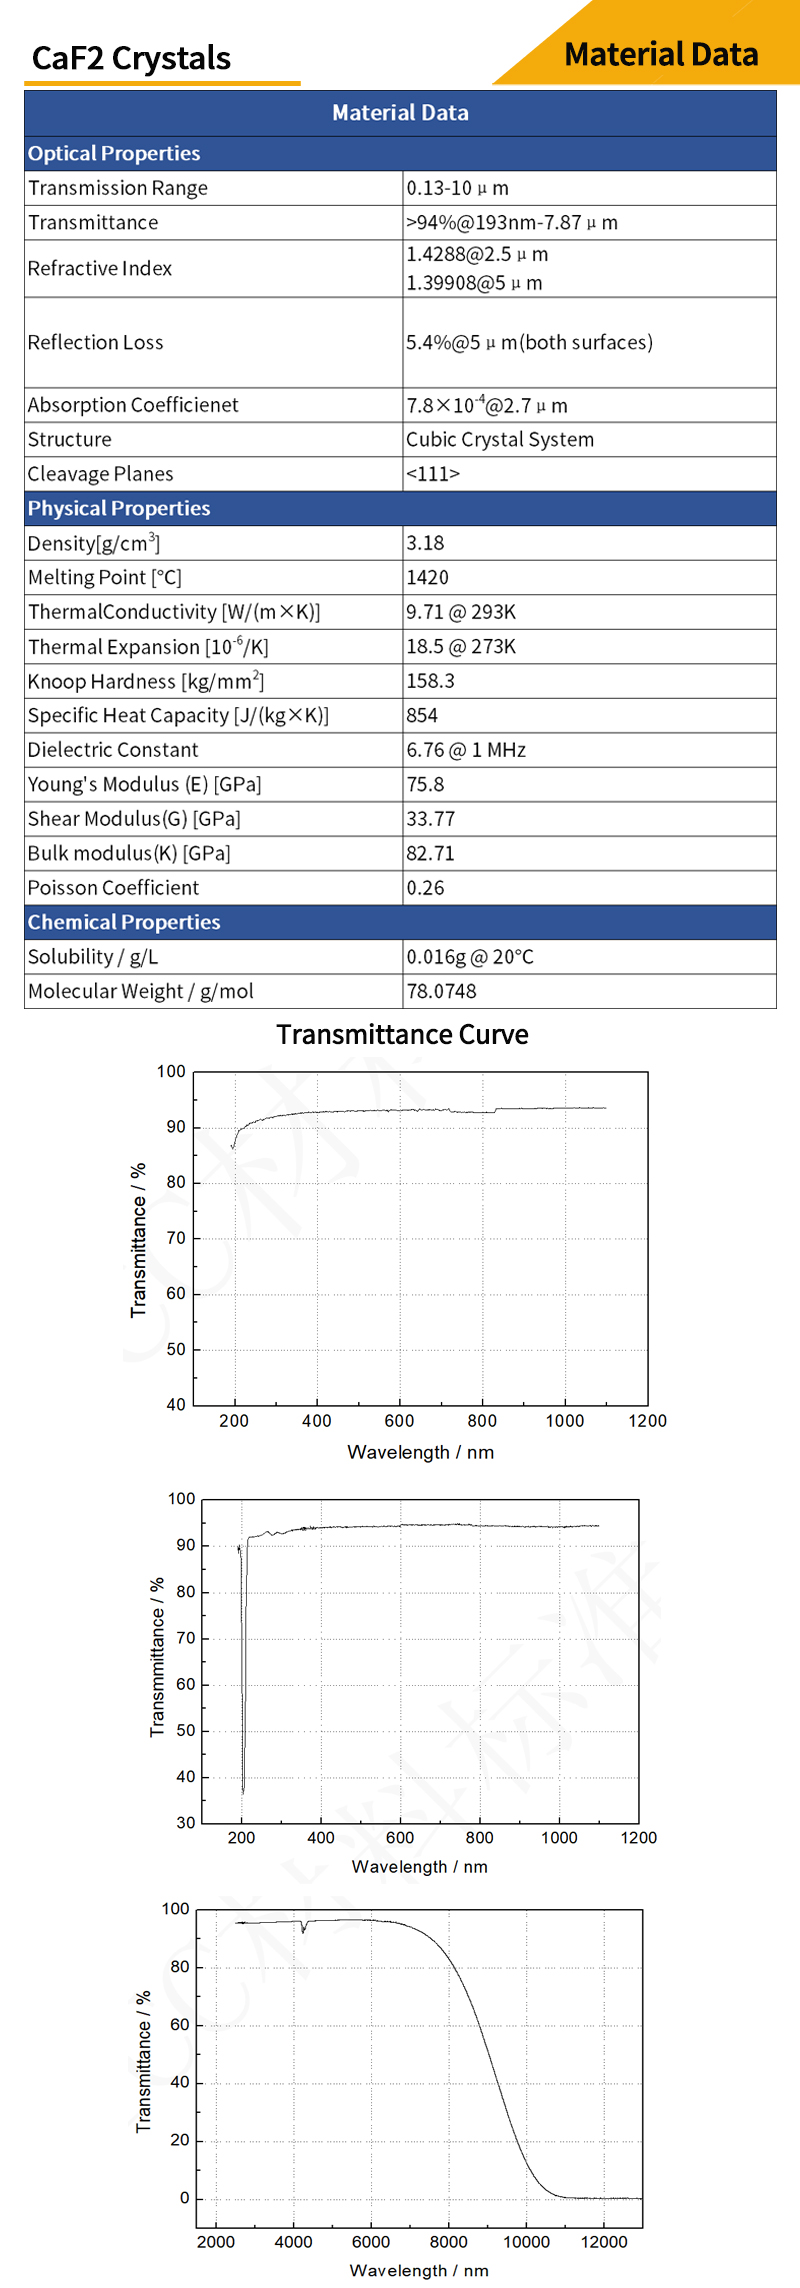 Large size calcium fluoride material data and transmittance curves